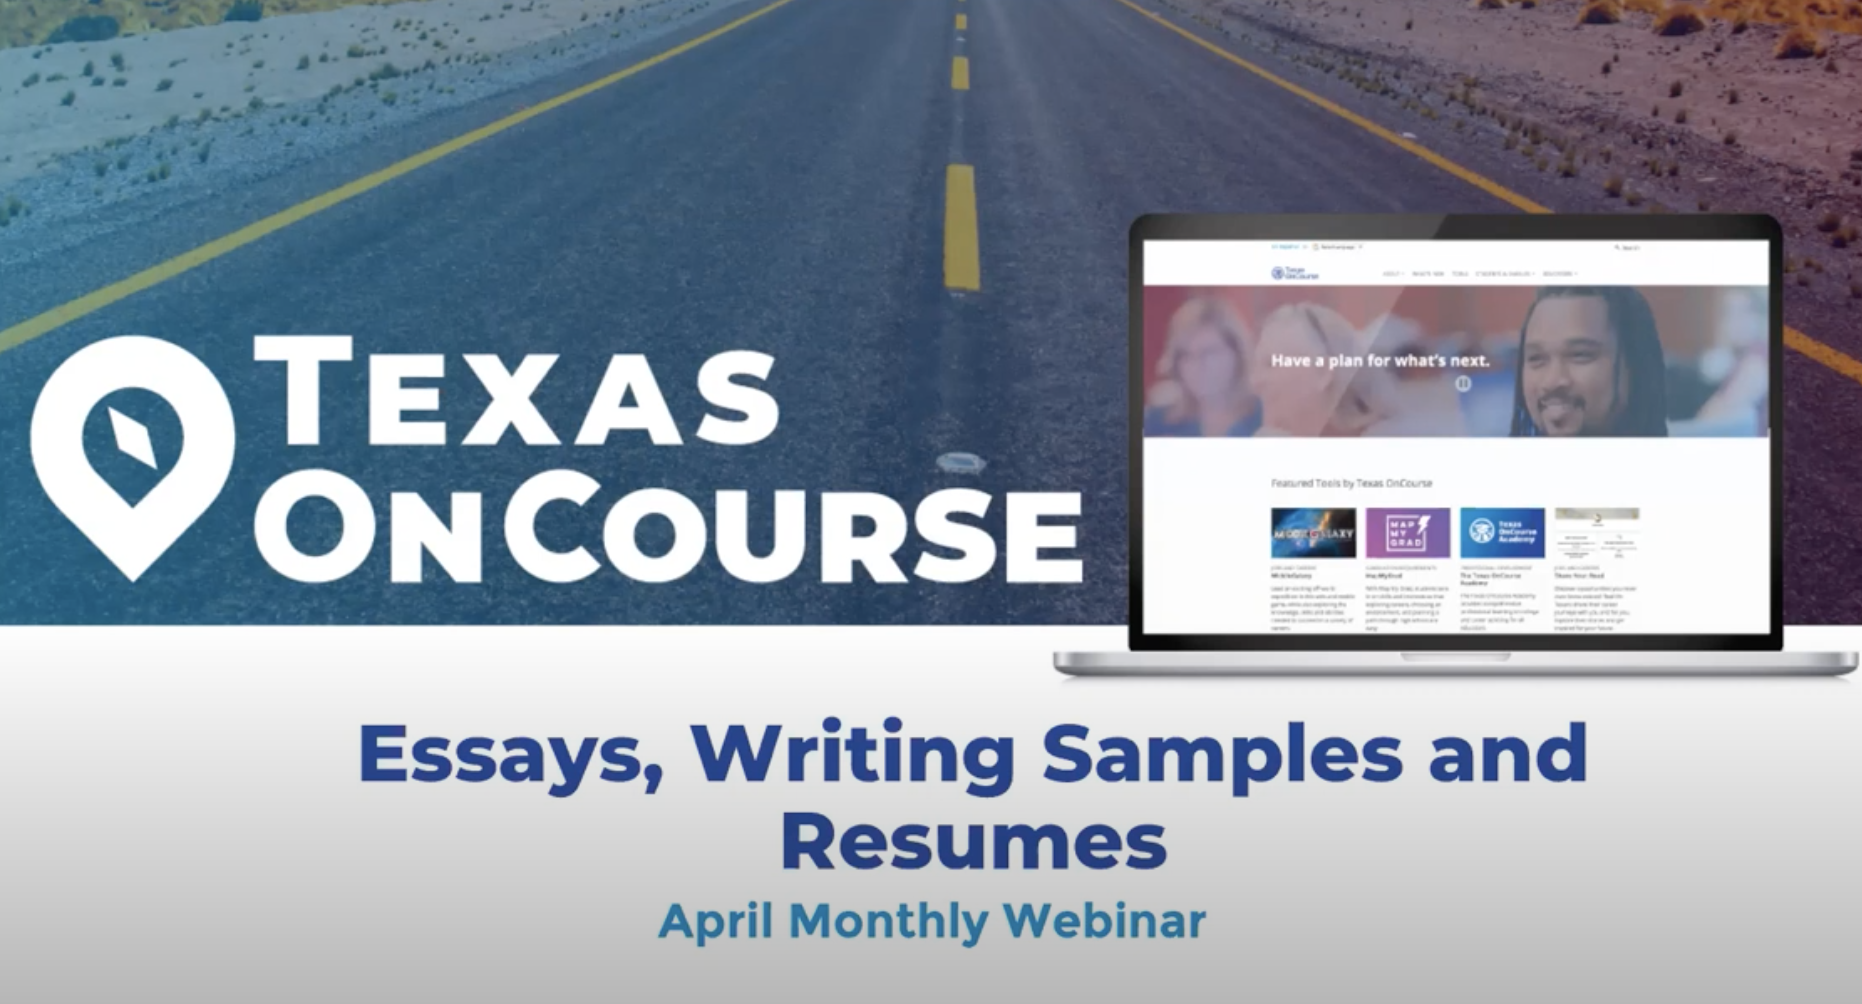 Essays, Writing Samples, and Resumes - April Monthly Webinar